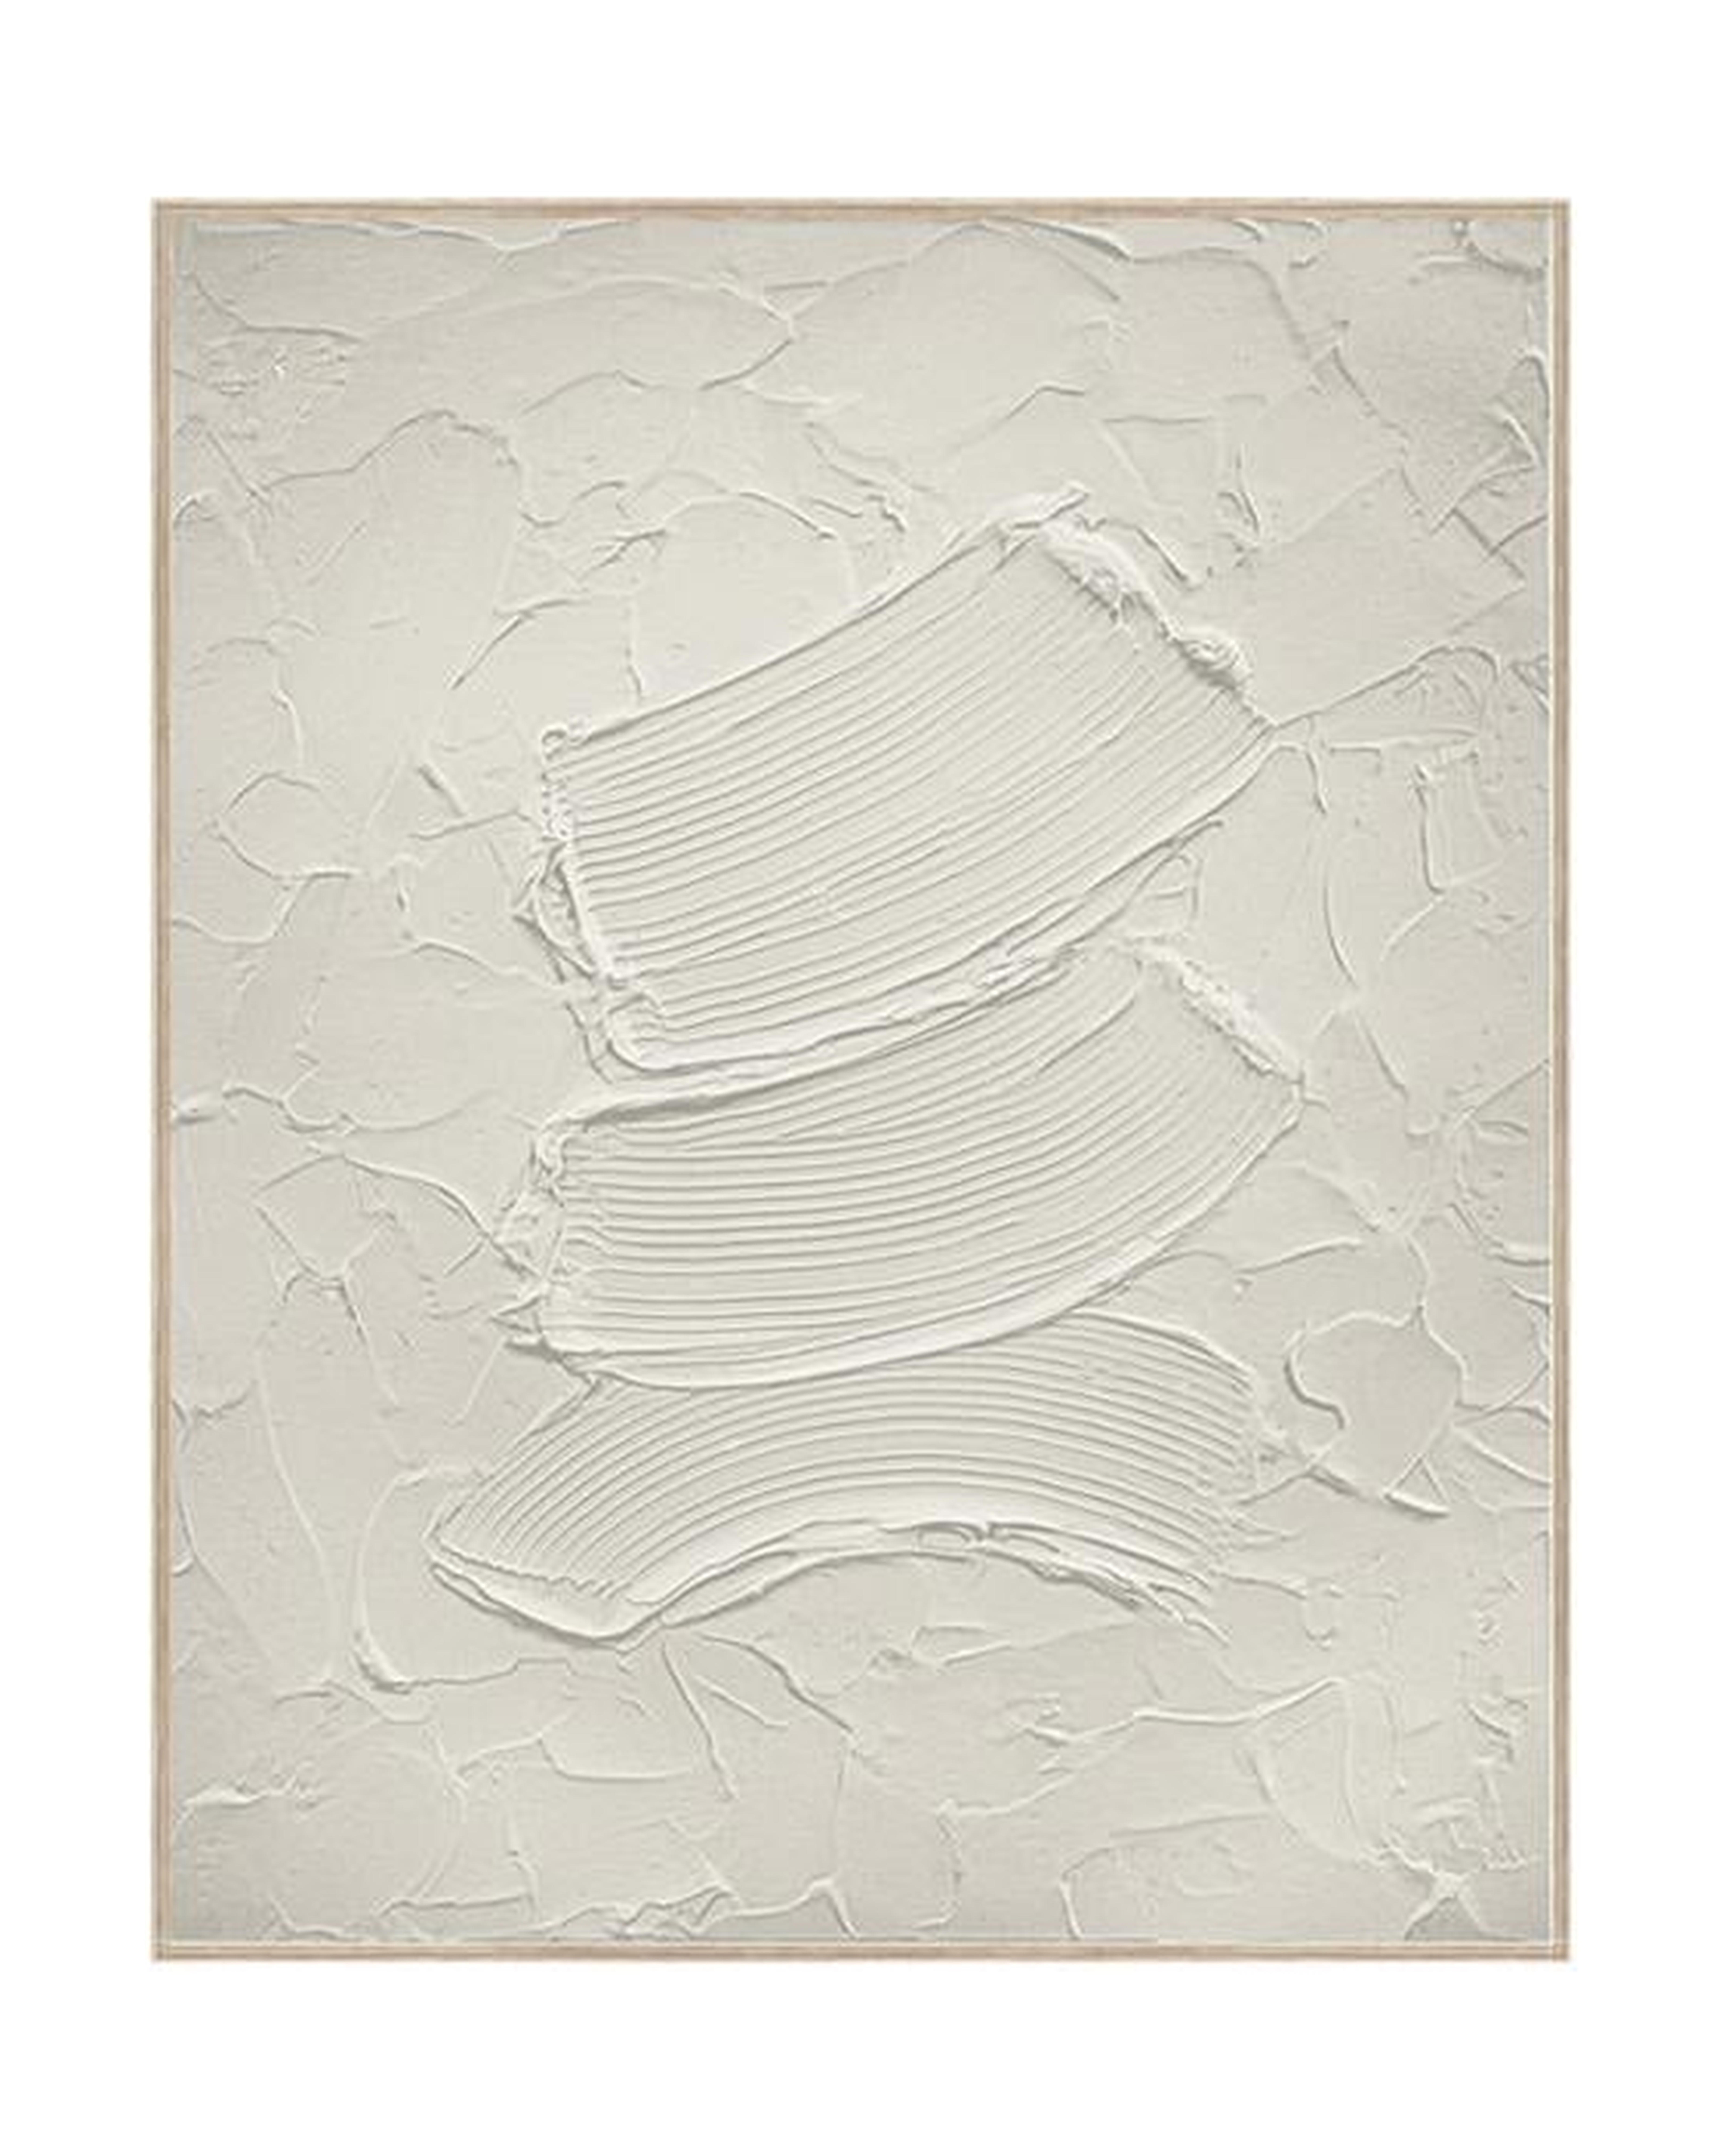 Textured Movement, 25.5" x 30.5" - McGee & Co.